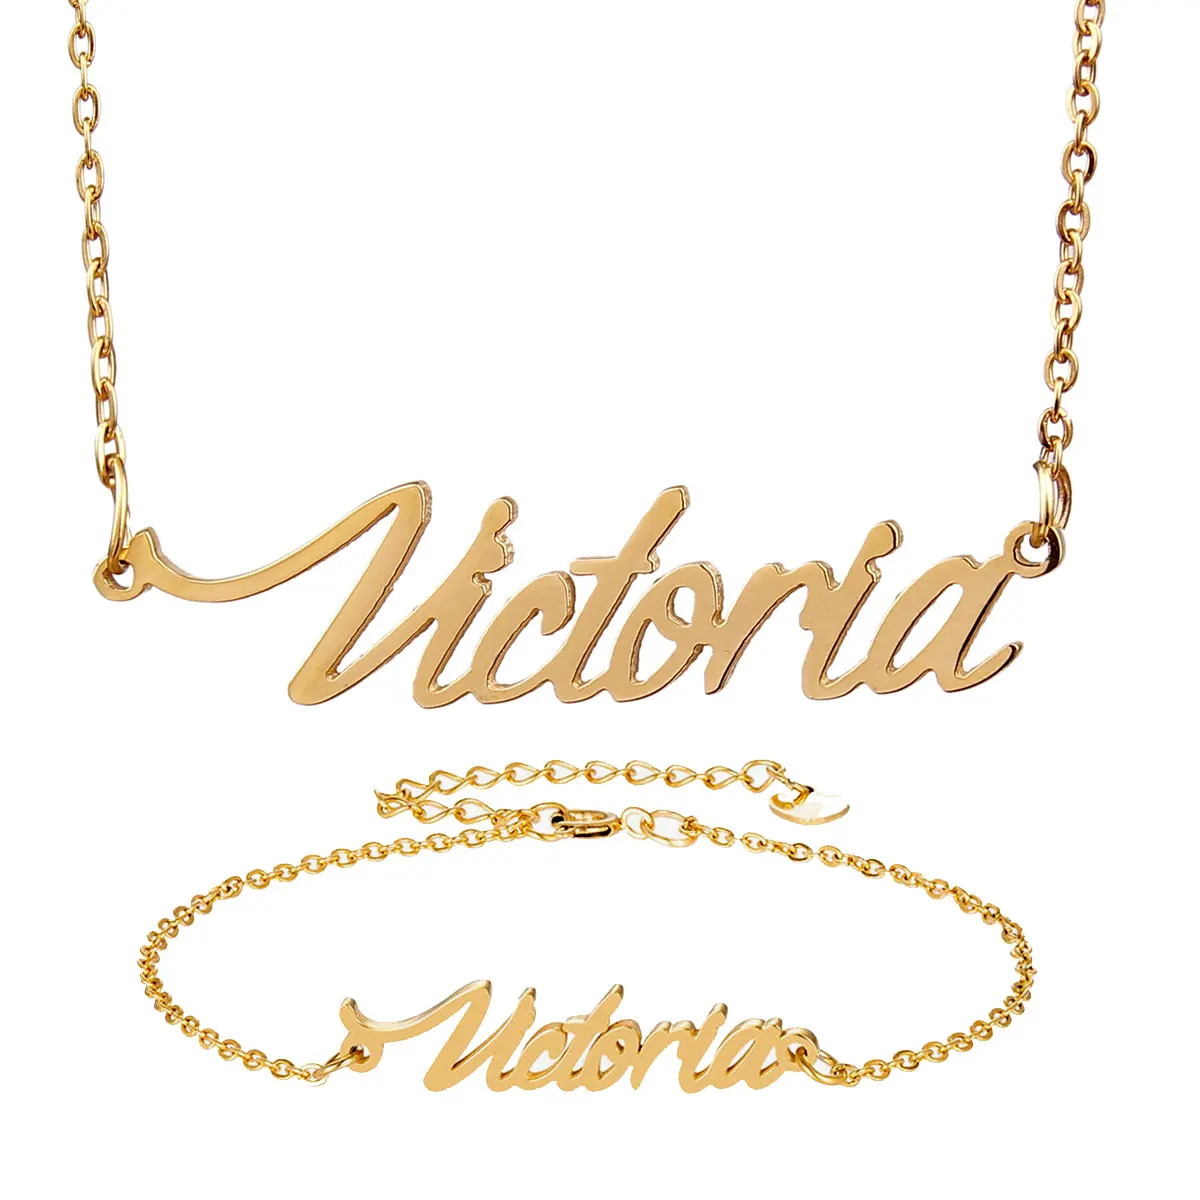 

Fashion Stainless Steel Name Necklace Bracelet Set " Victoria " Script Letter Gold Choker Chain Necklace Pendant Nameplate Gift